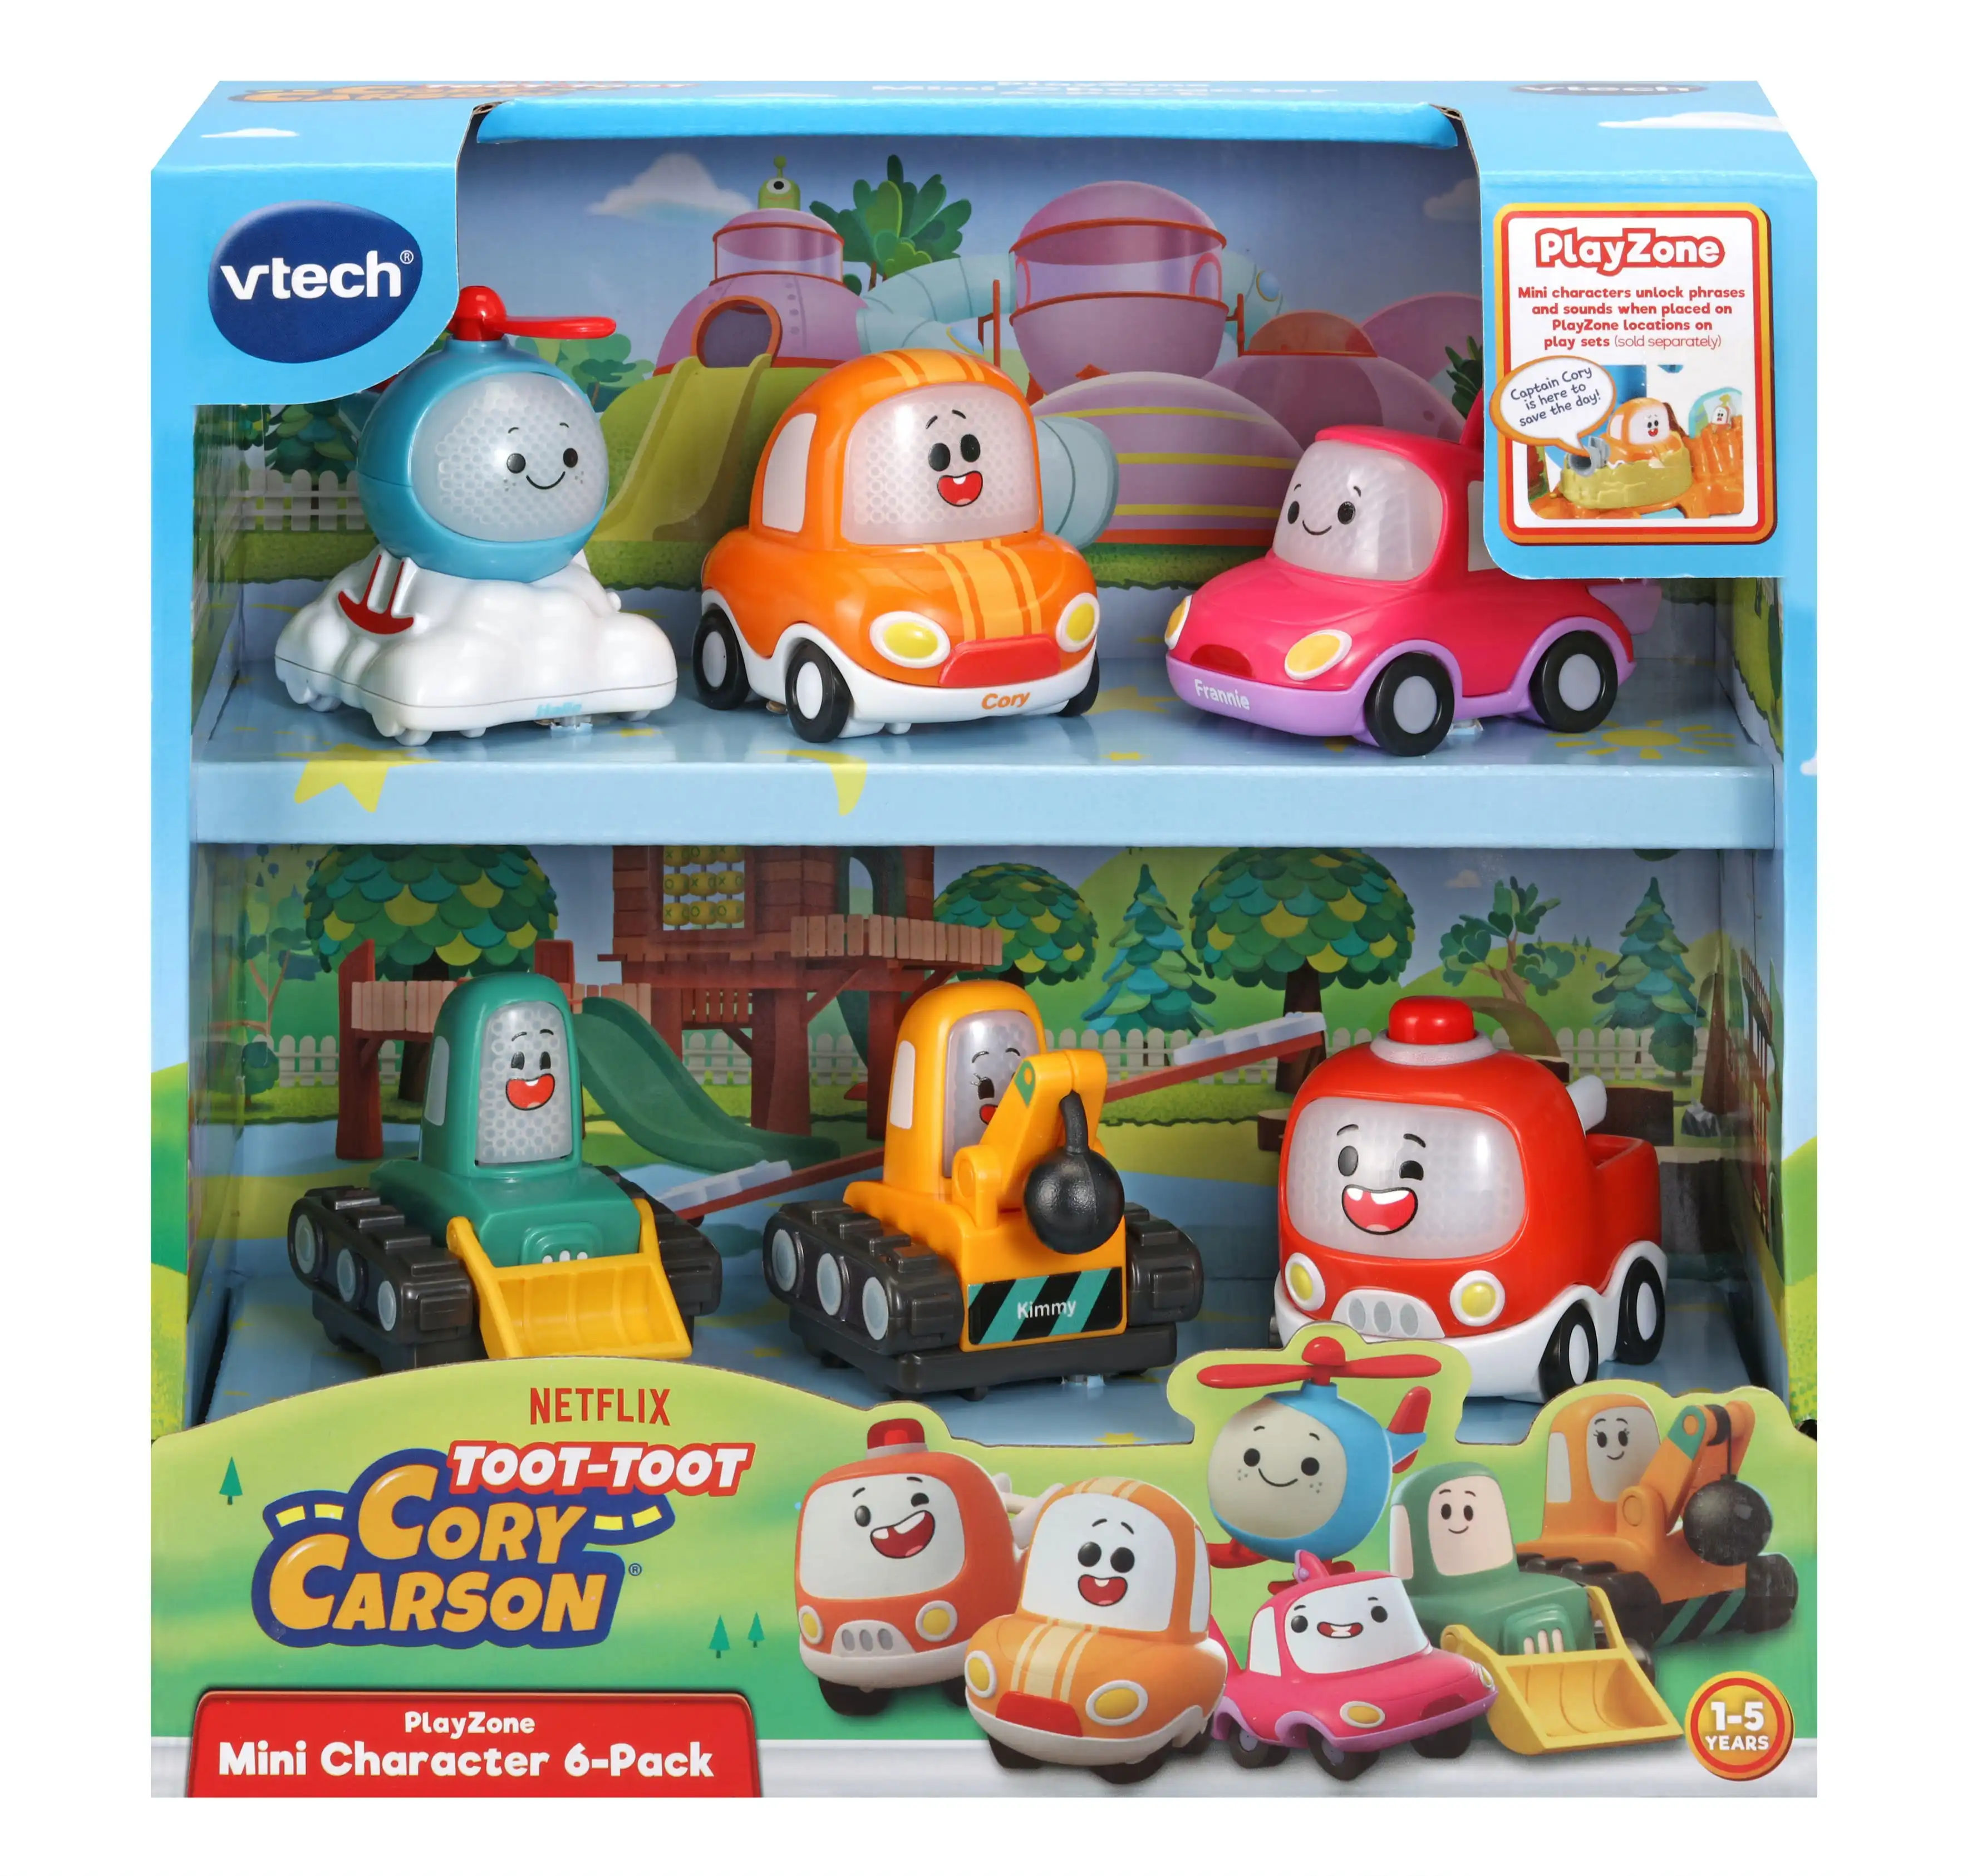 VTech Toot-Toot Cory Carson Playzone Mini Character 6 Pack